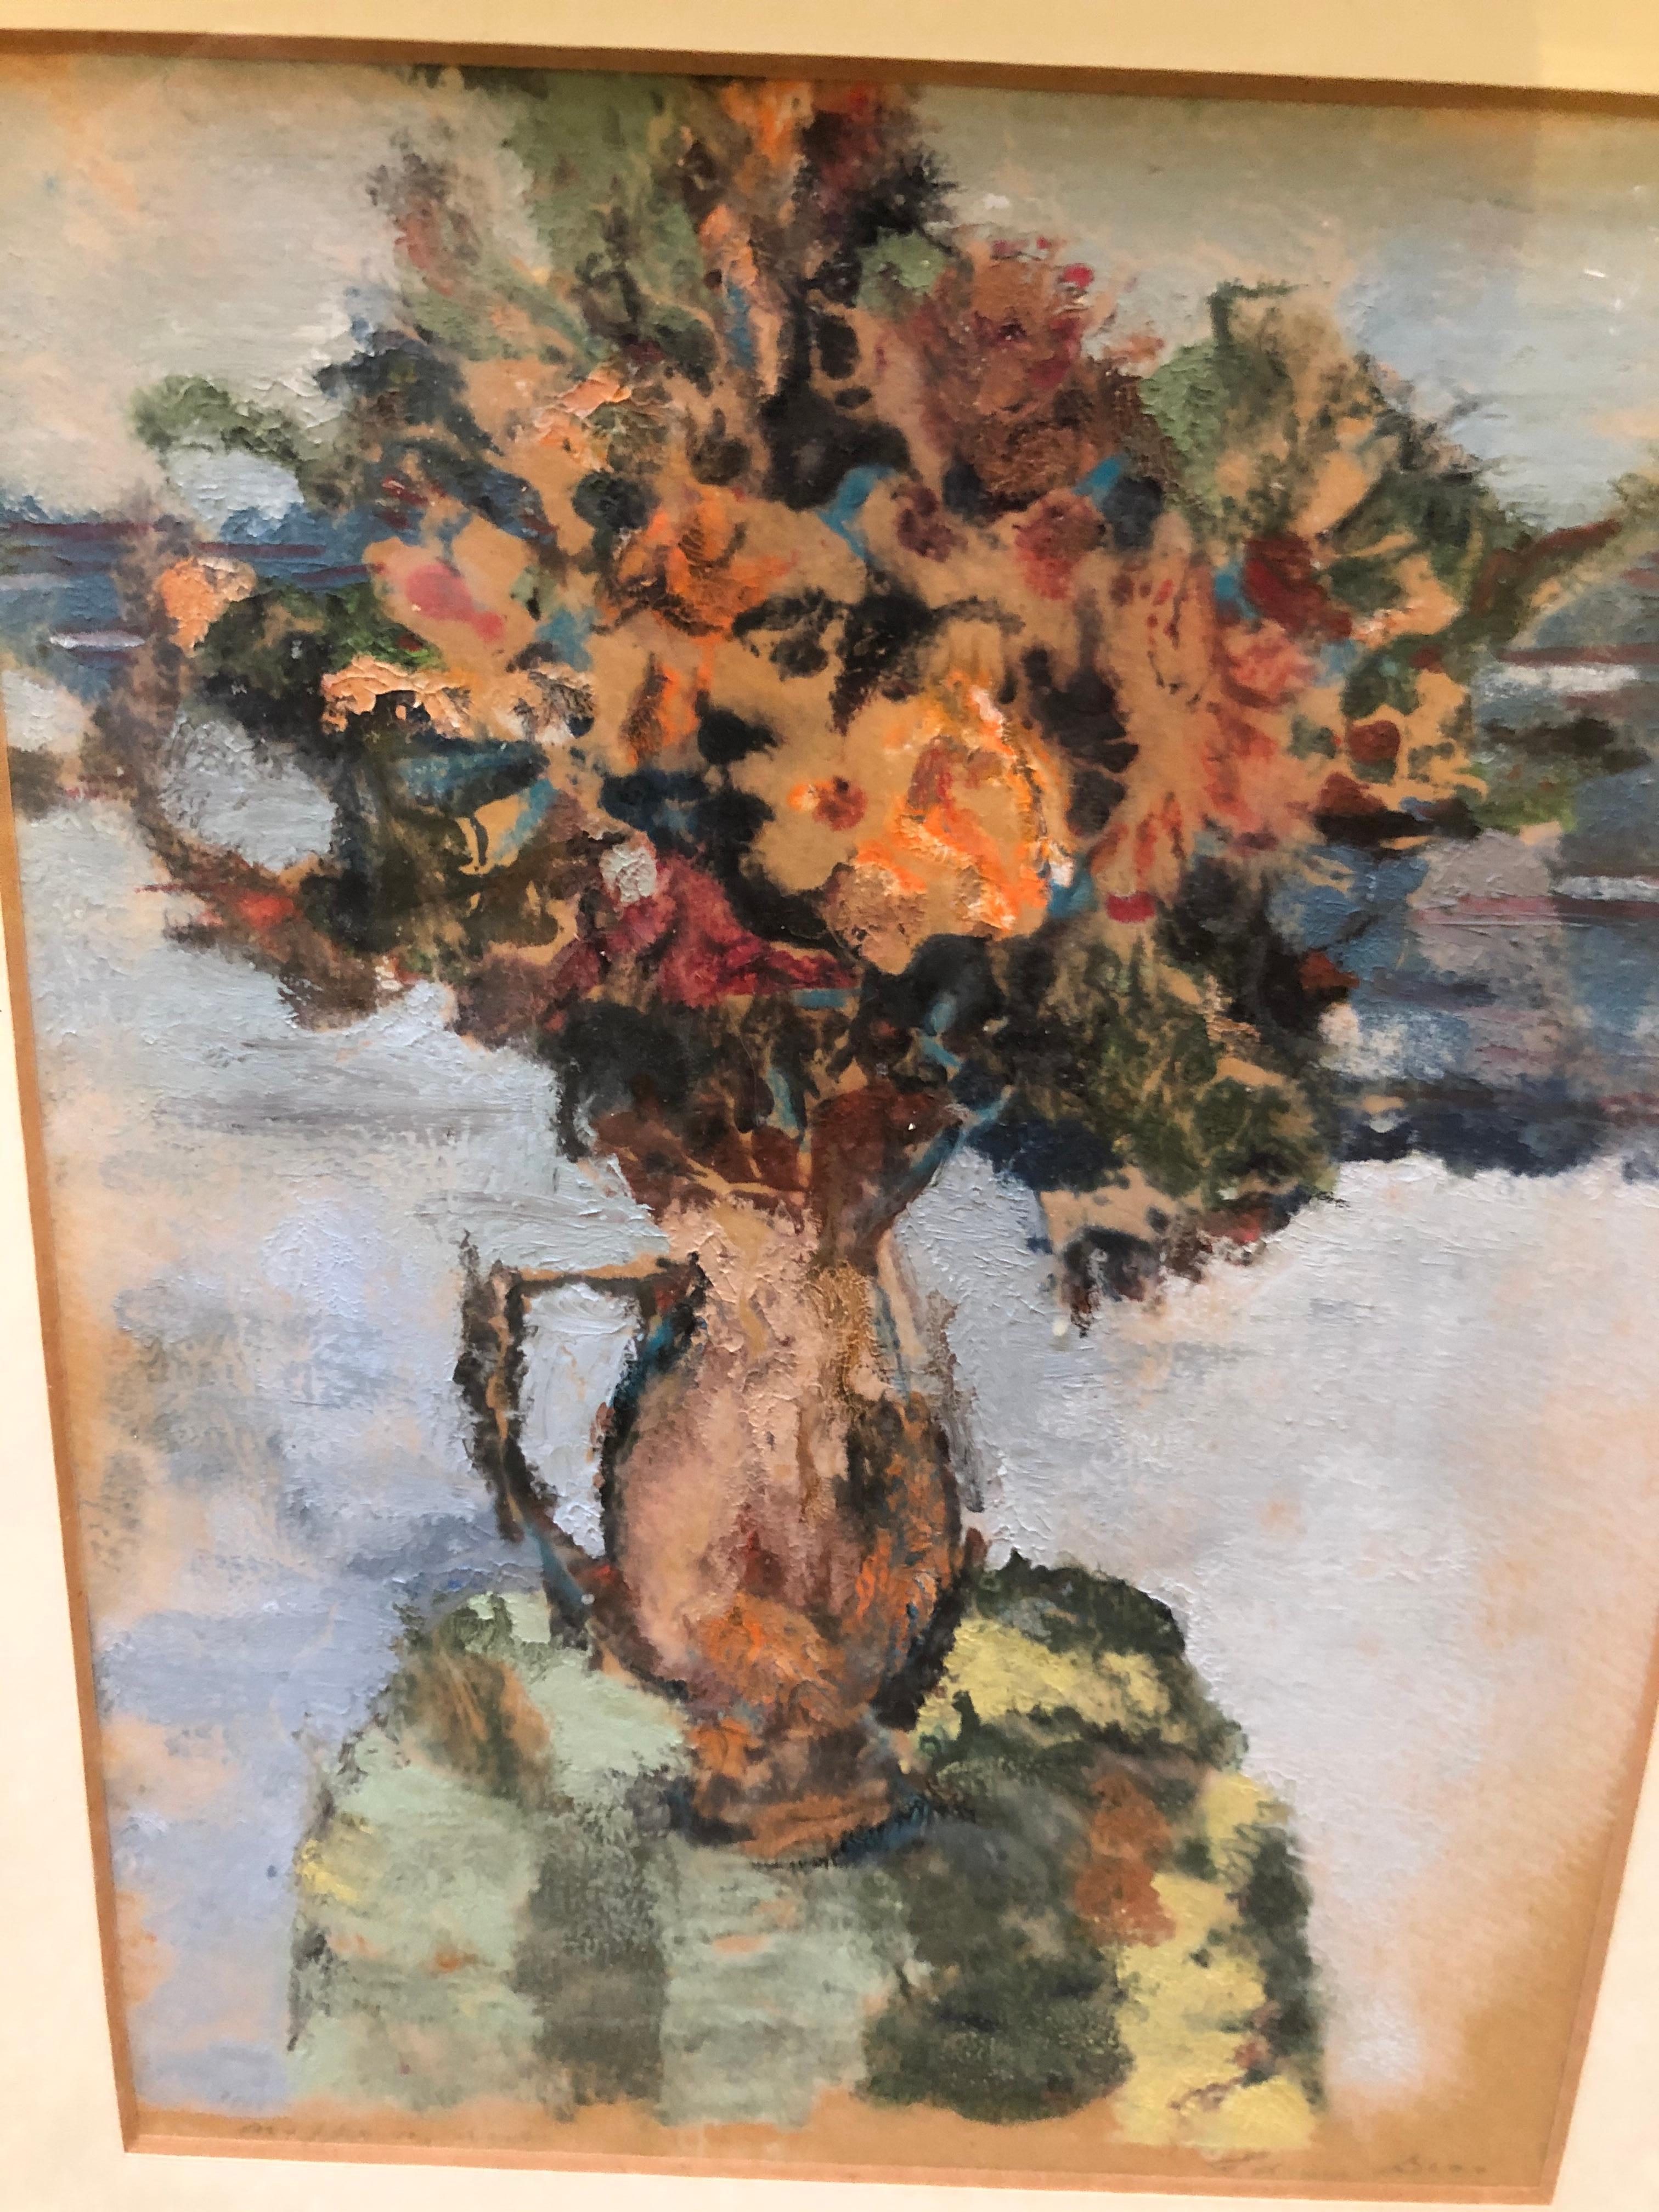 Edna Gass Still Life - Painting by Edna Gass, Early 20th Century